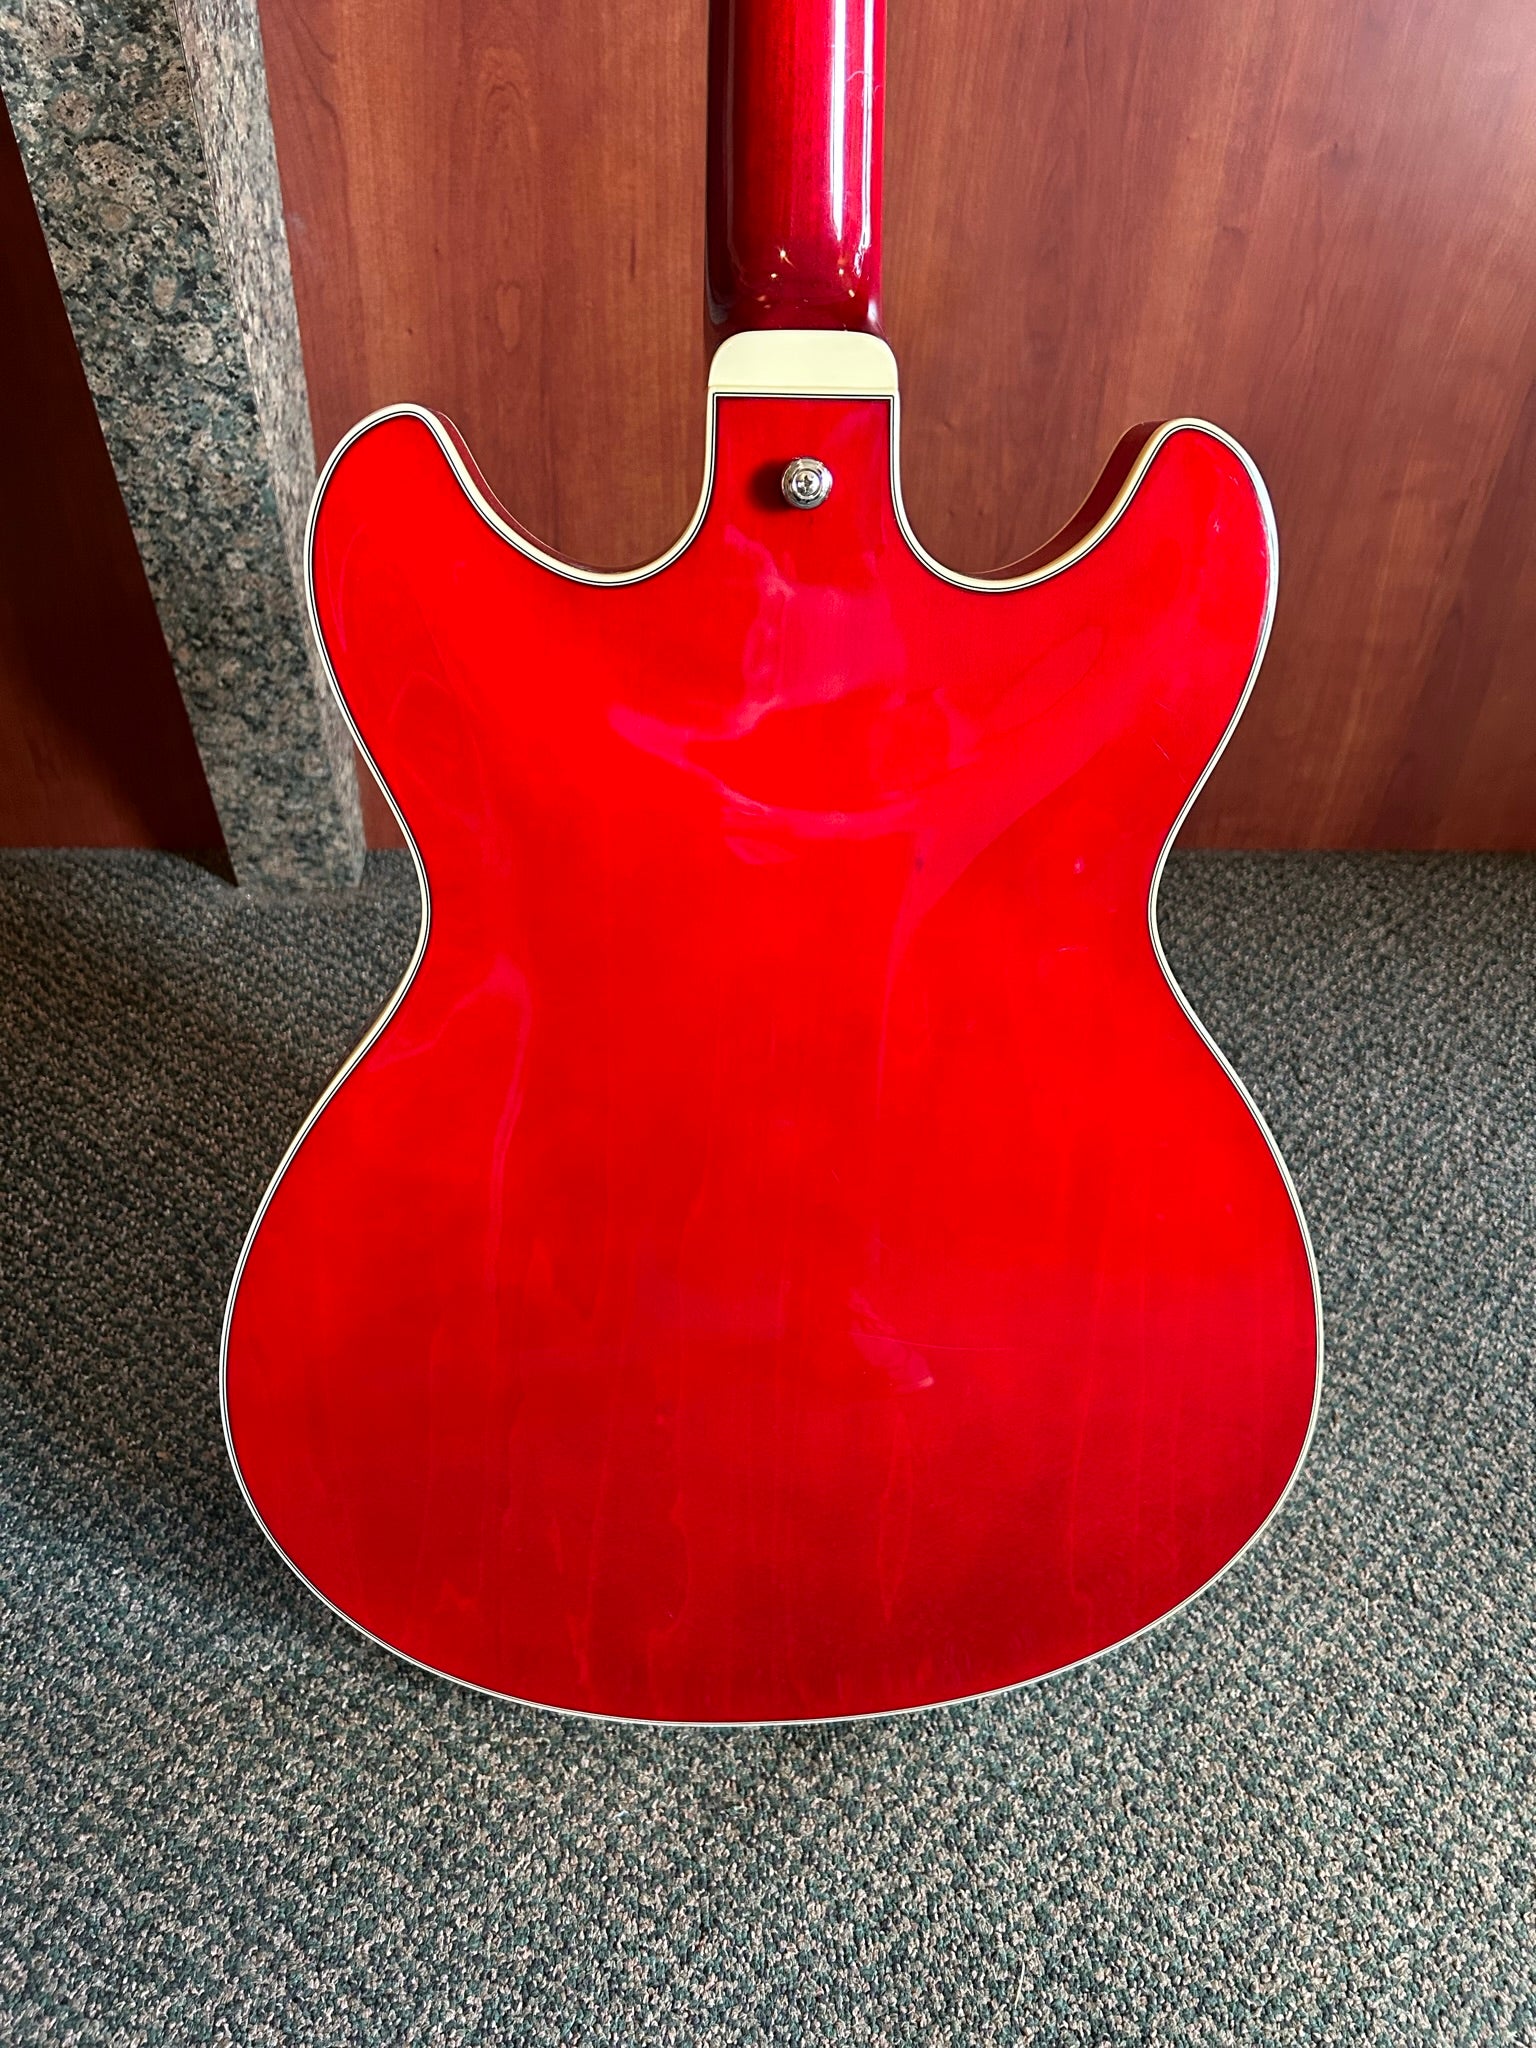 Ibanez Artcore AS73 Semi-Hollow Body Cherry Red Guitar